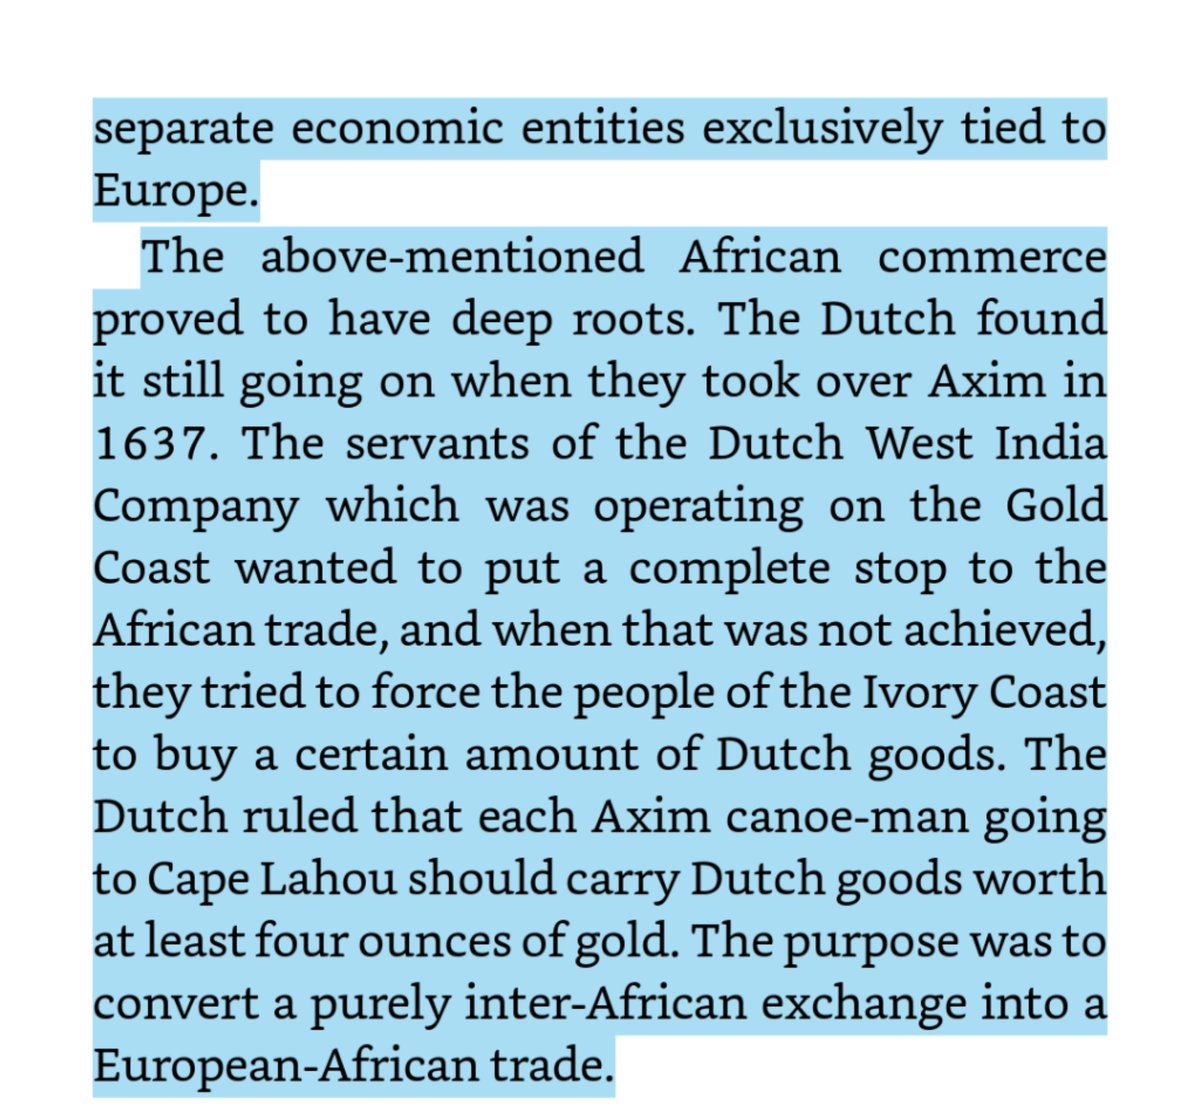 Europeans also systematically destroyed African trade routes, occasionally only allowing Africans to trade among ourselves if the goods were European.(BTW, when they were leaving too, they made sure only stooges who maintained these structures occupied political offices.)